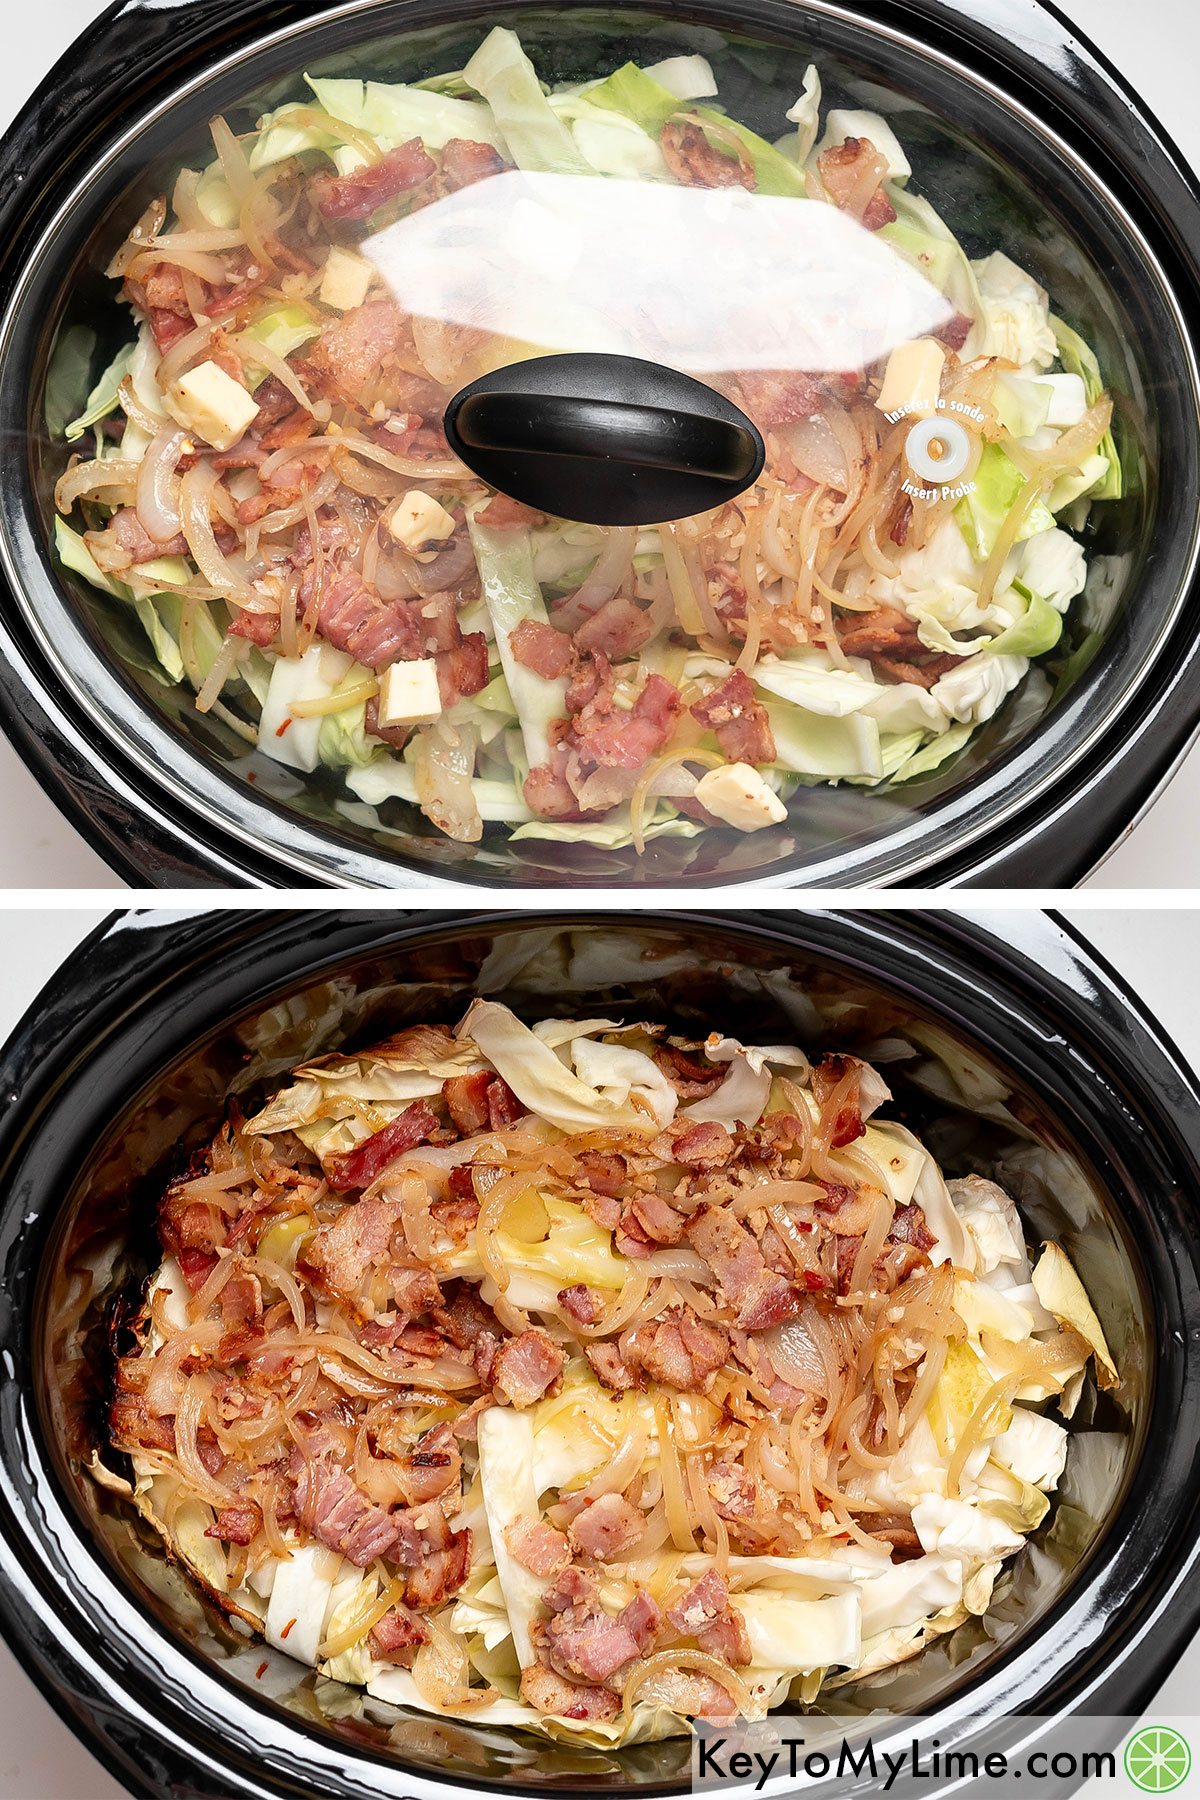 Covering and cooking the cabbage half way in a crockpot, and then tossing the cabbage mixture.